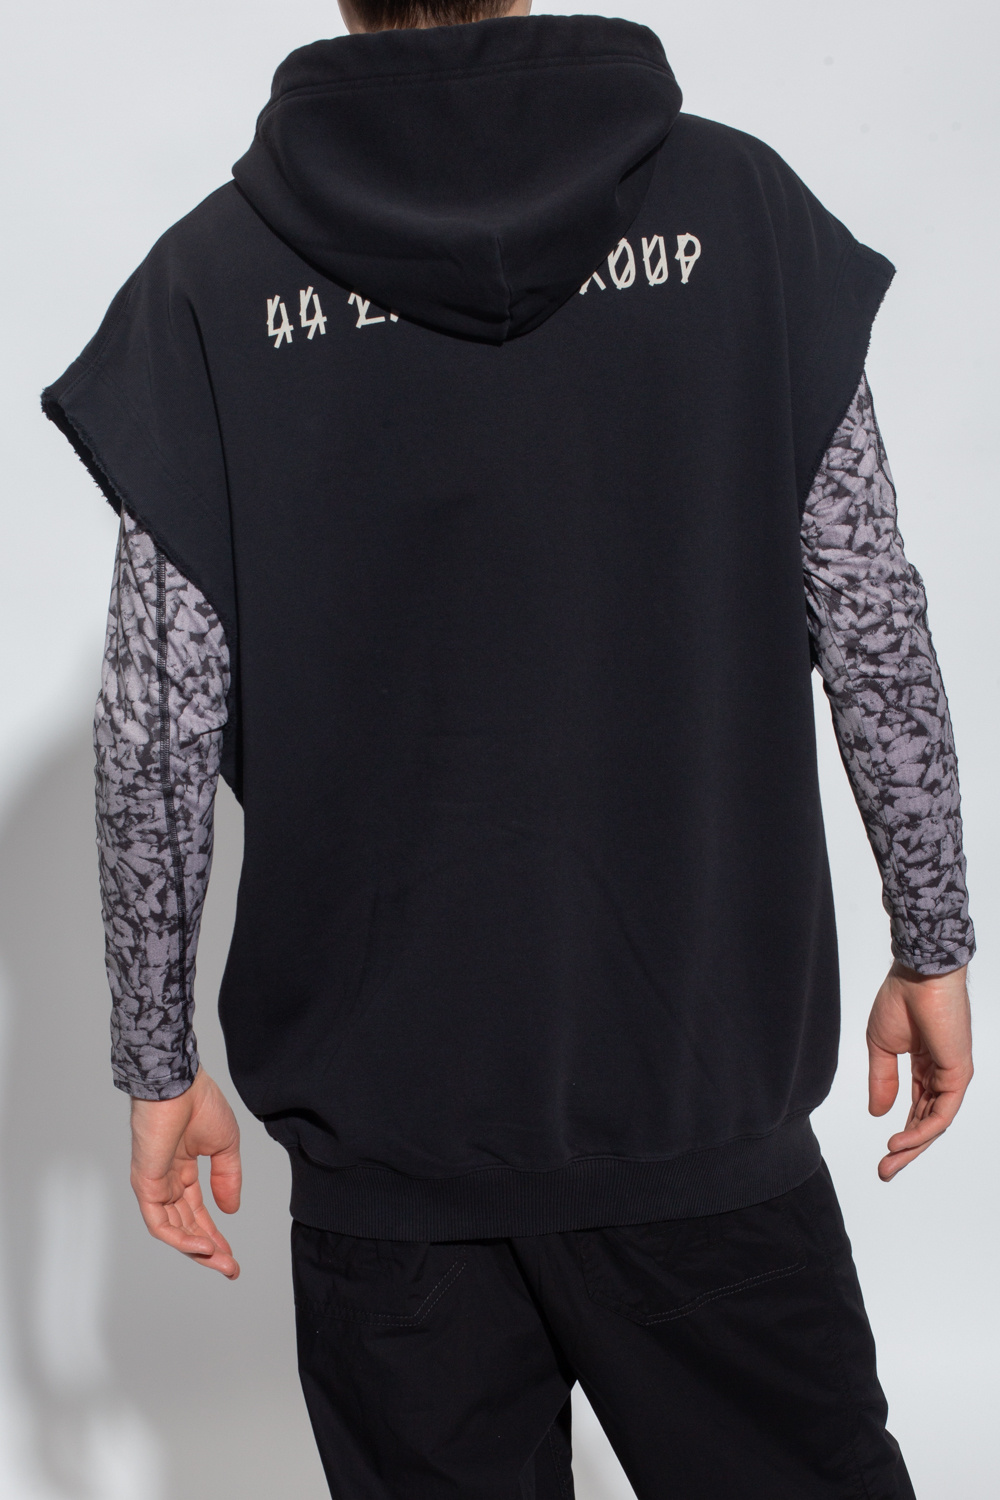 44 Label Group ‘Chaos’ sleeveless hoodie